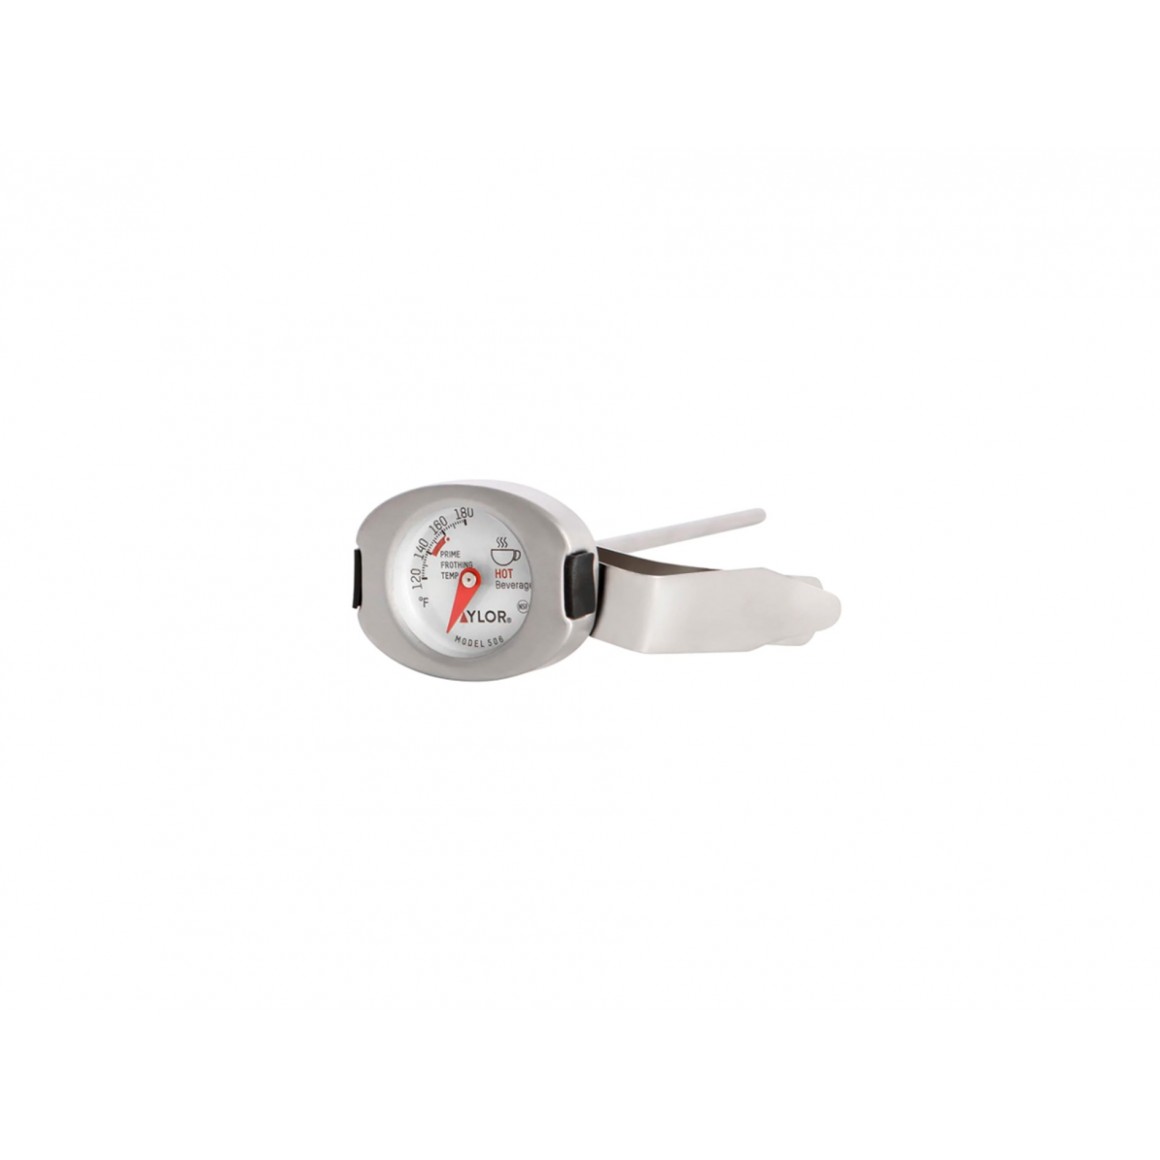 Hot beverage thermometer